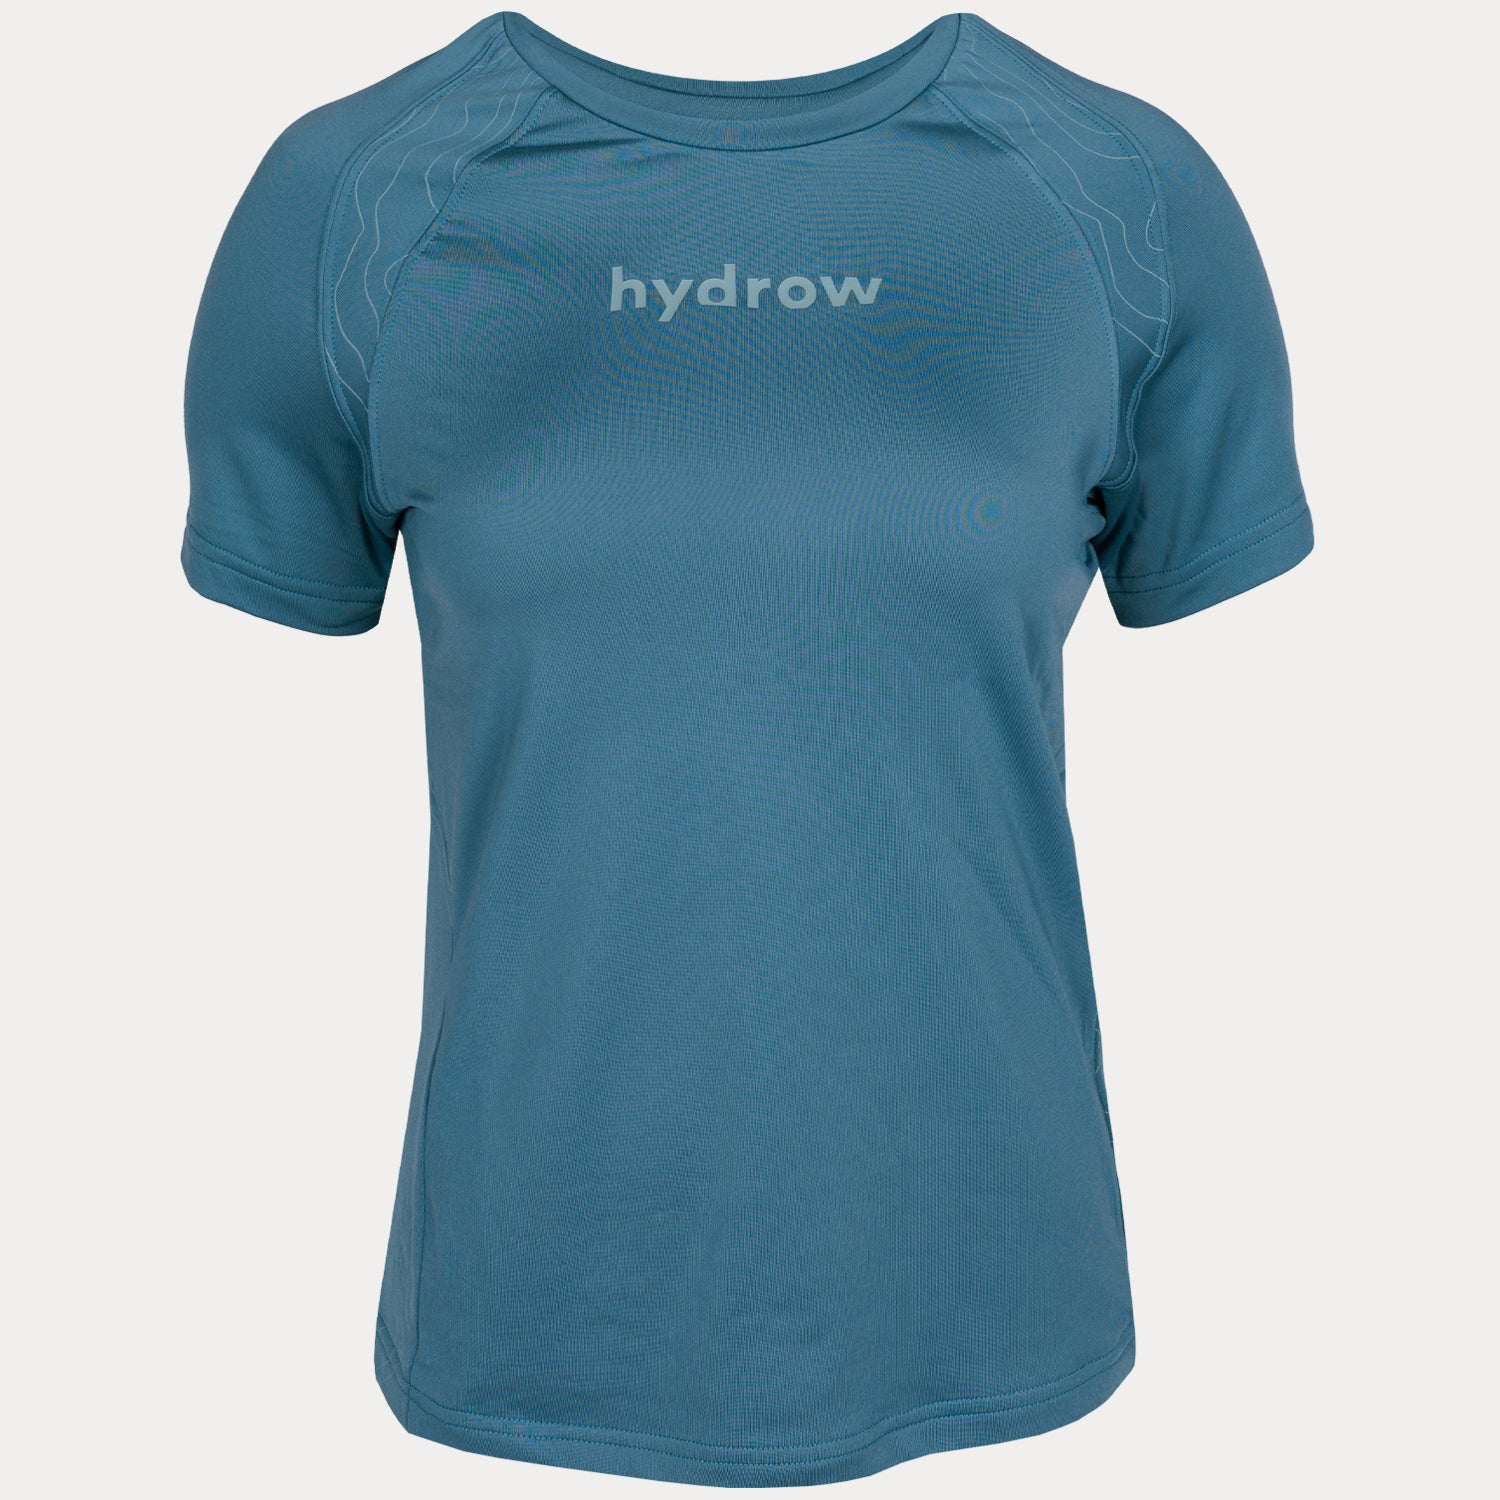 moisture wicking compression tee in gray with hydrow logo on chest